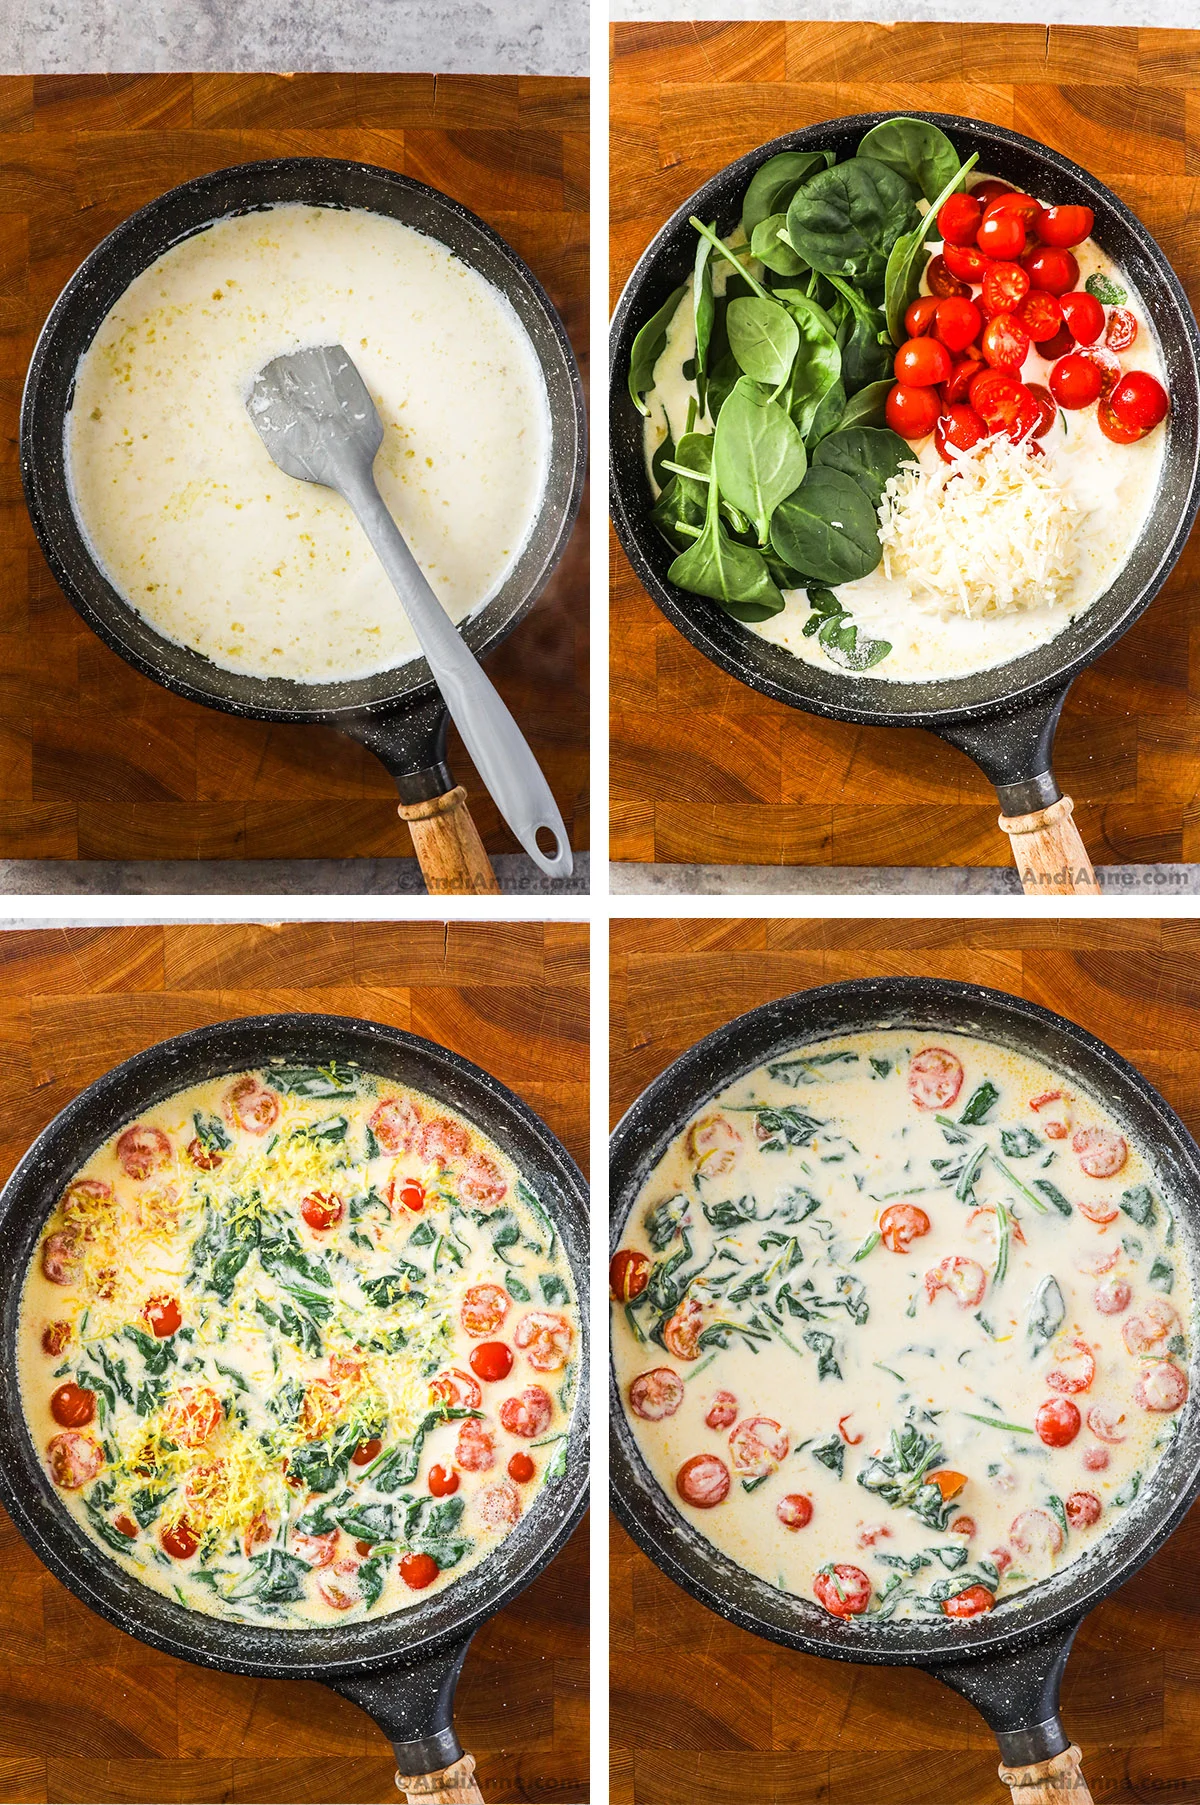 A pan with creamy white sauce and spatula, baby spinach, tomatoes and parmesan dumped in, then everything mixed together and lemon zest sprinkled over top, then last image all vegetables wilted and mixed with creamy sauce